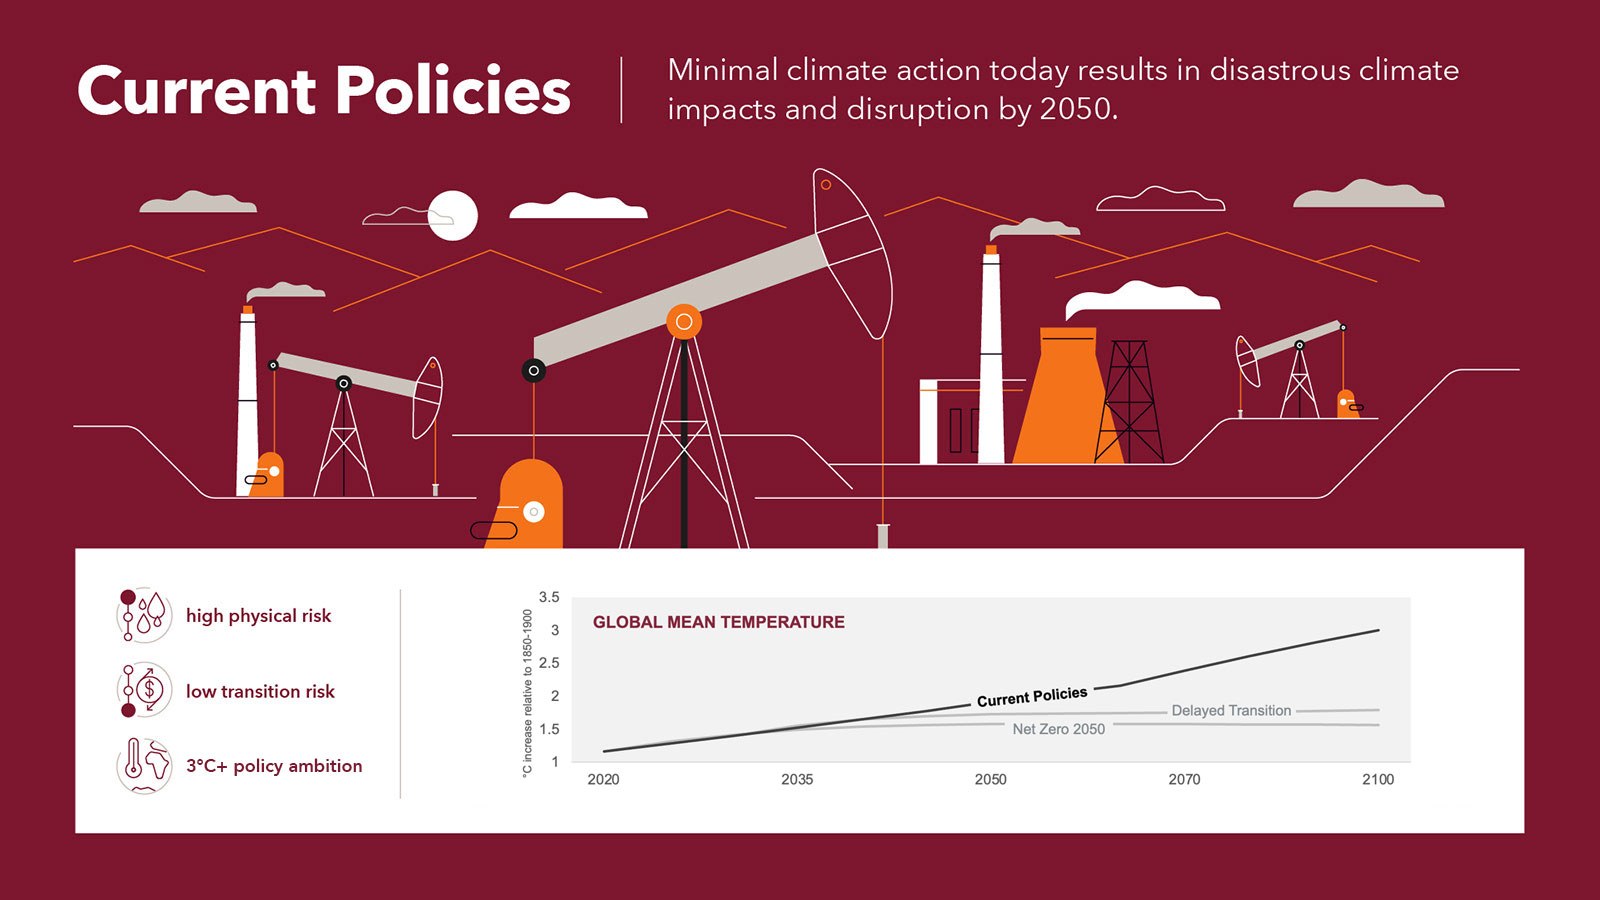 Scenario 1: Current Policies, Minimal climate action today results in disastrous climate impacts and disruption by 2050.